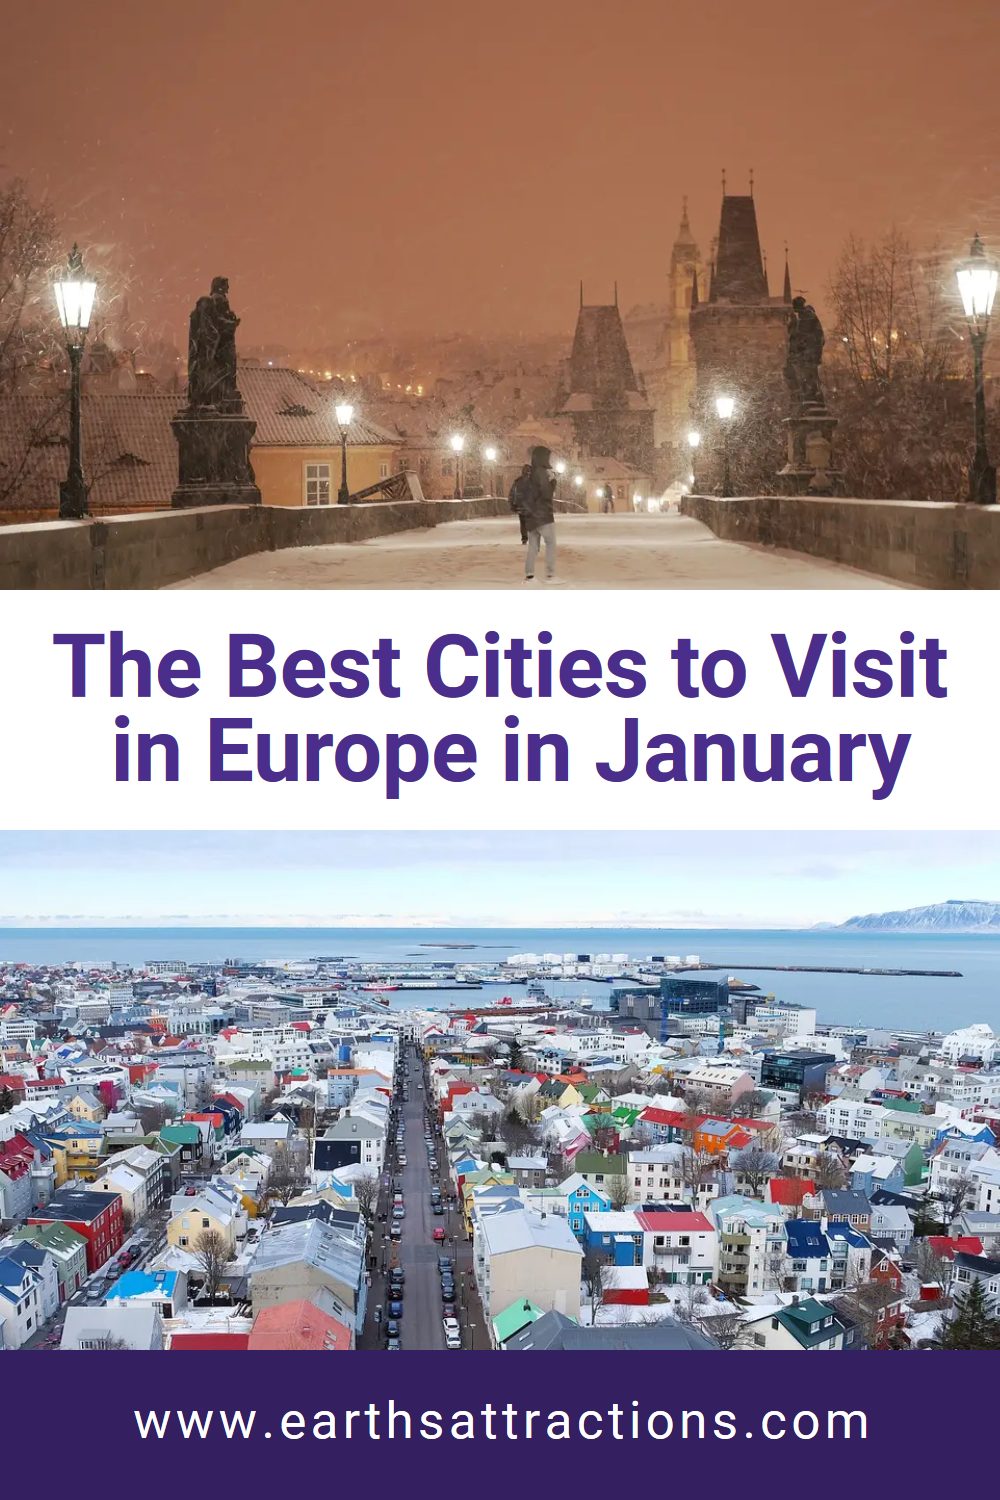 The best cities to visit in Europe in January. Wondering where to travel in January? Here are the best places to visit in Europe in January for all preferences! #europe #travel #europetravel #january #traveldestinations #placestogo #januarytravel